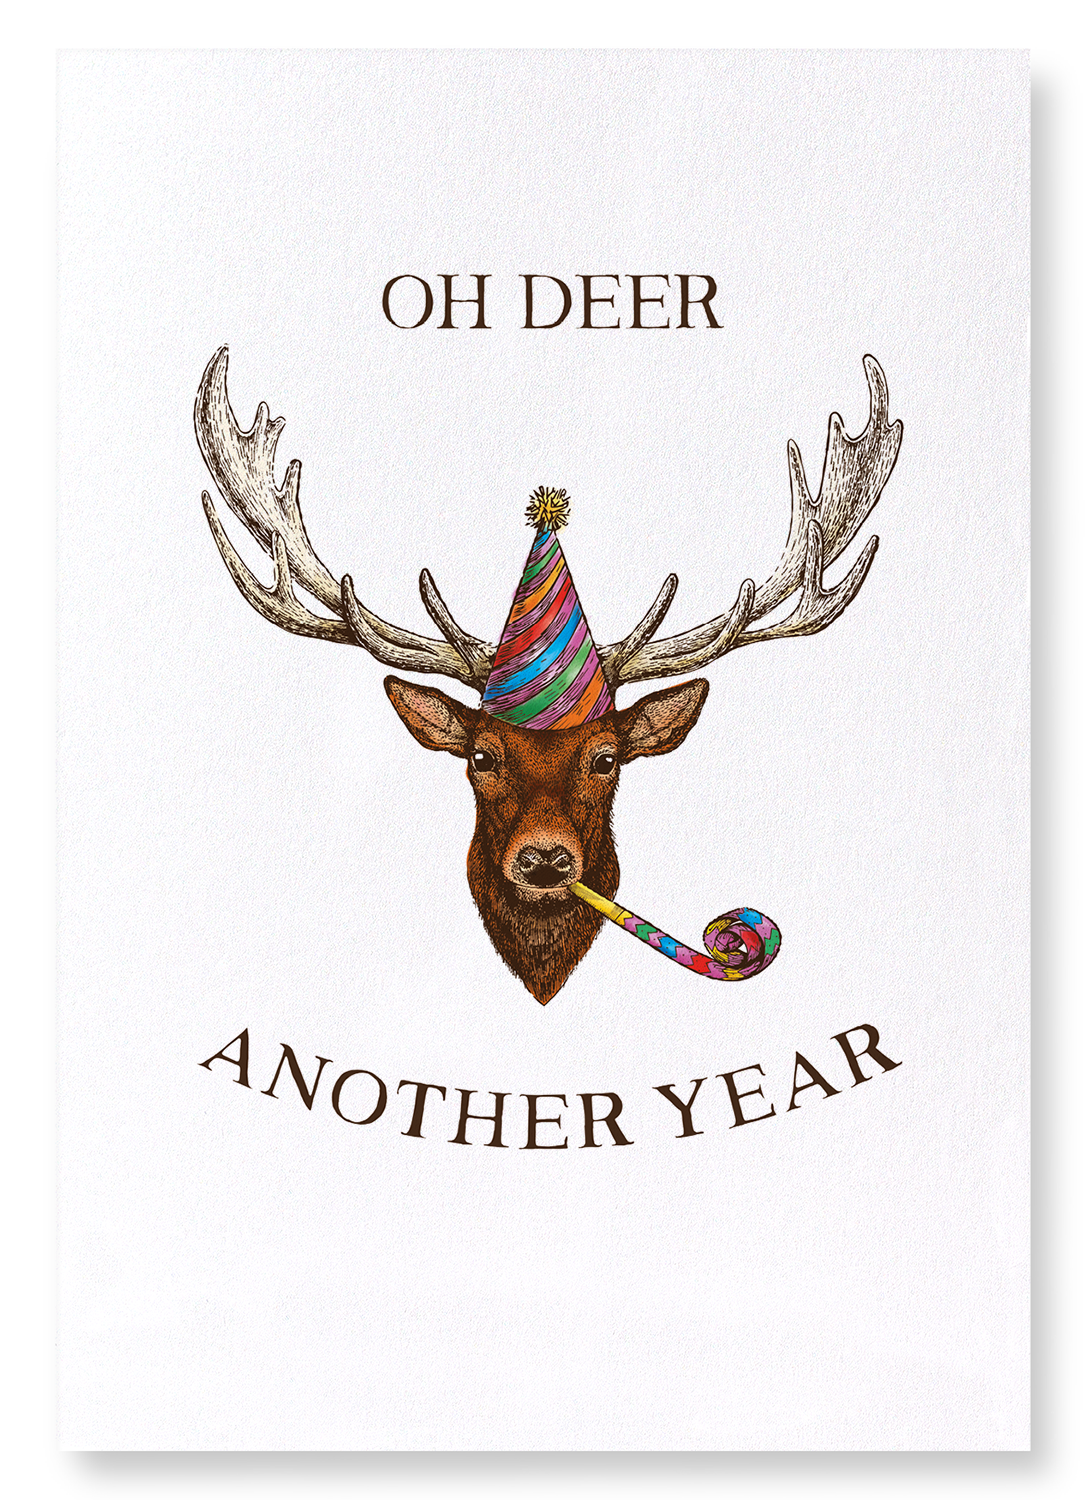 OH DEER ANOTHER YEAR : Victorian Art Print